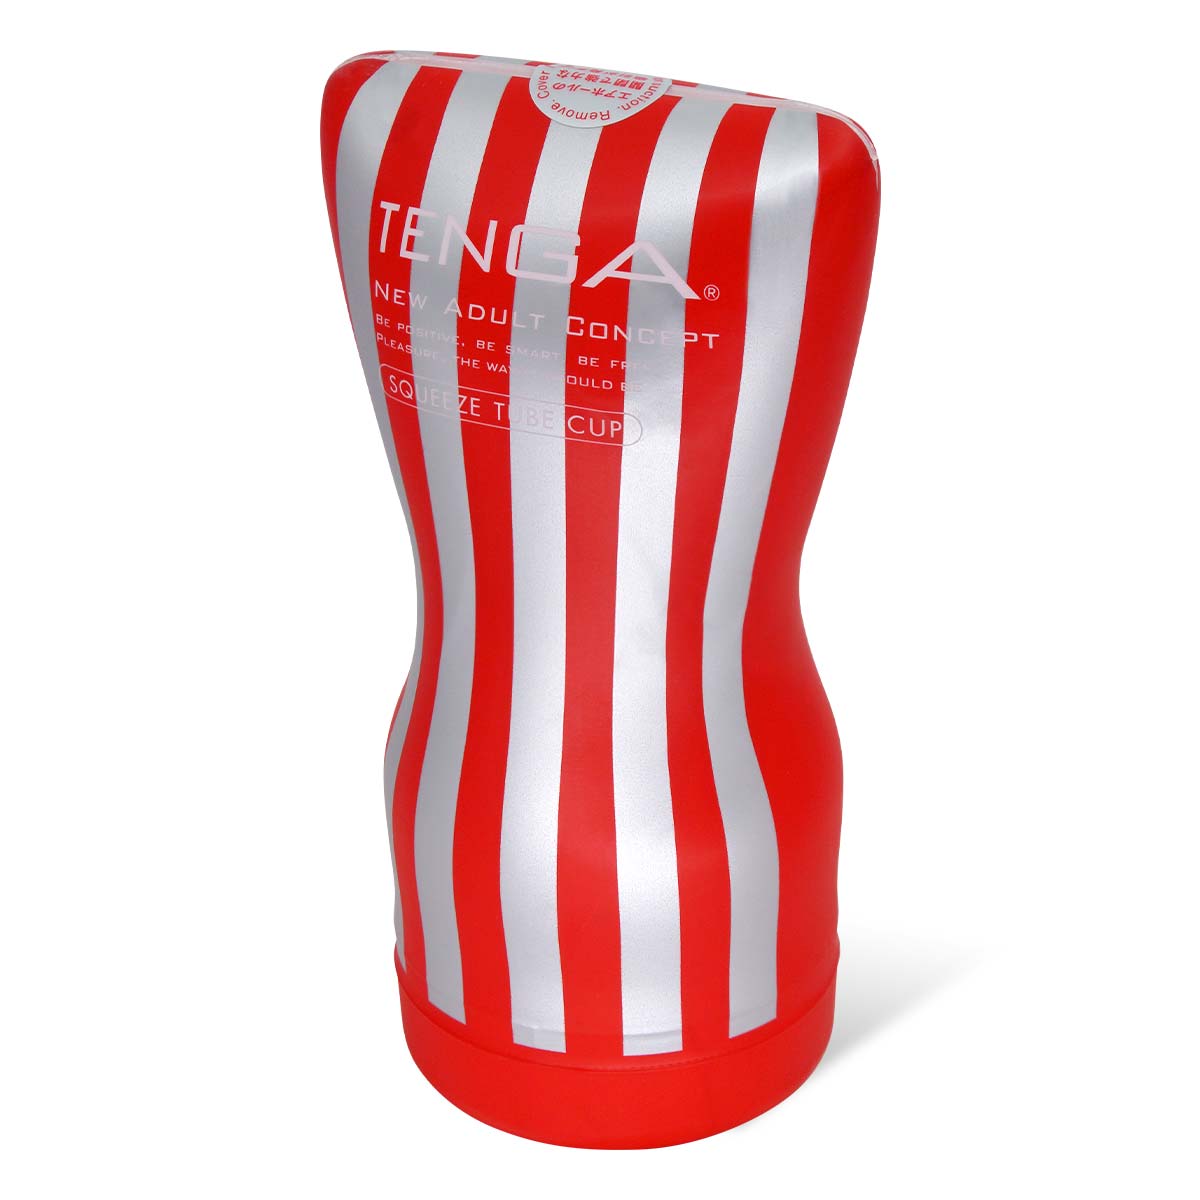 TENGA SQUEEZE TUBE CUP 2nd Generation-p_1